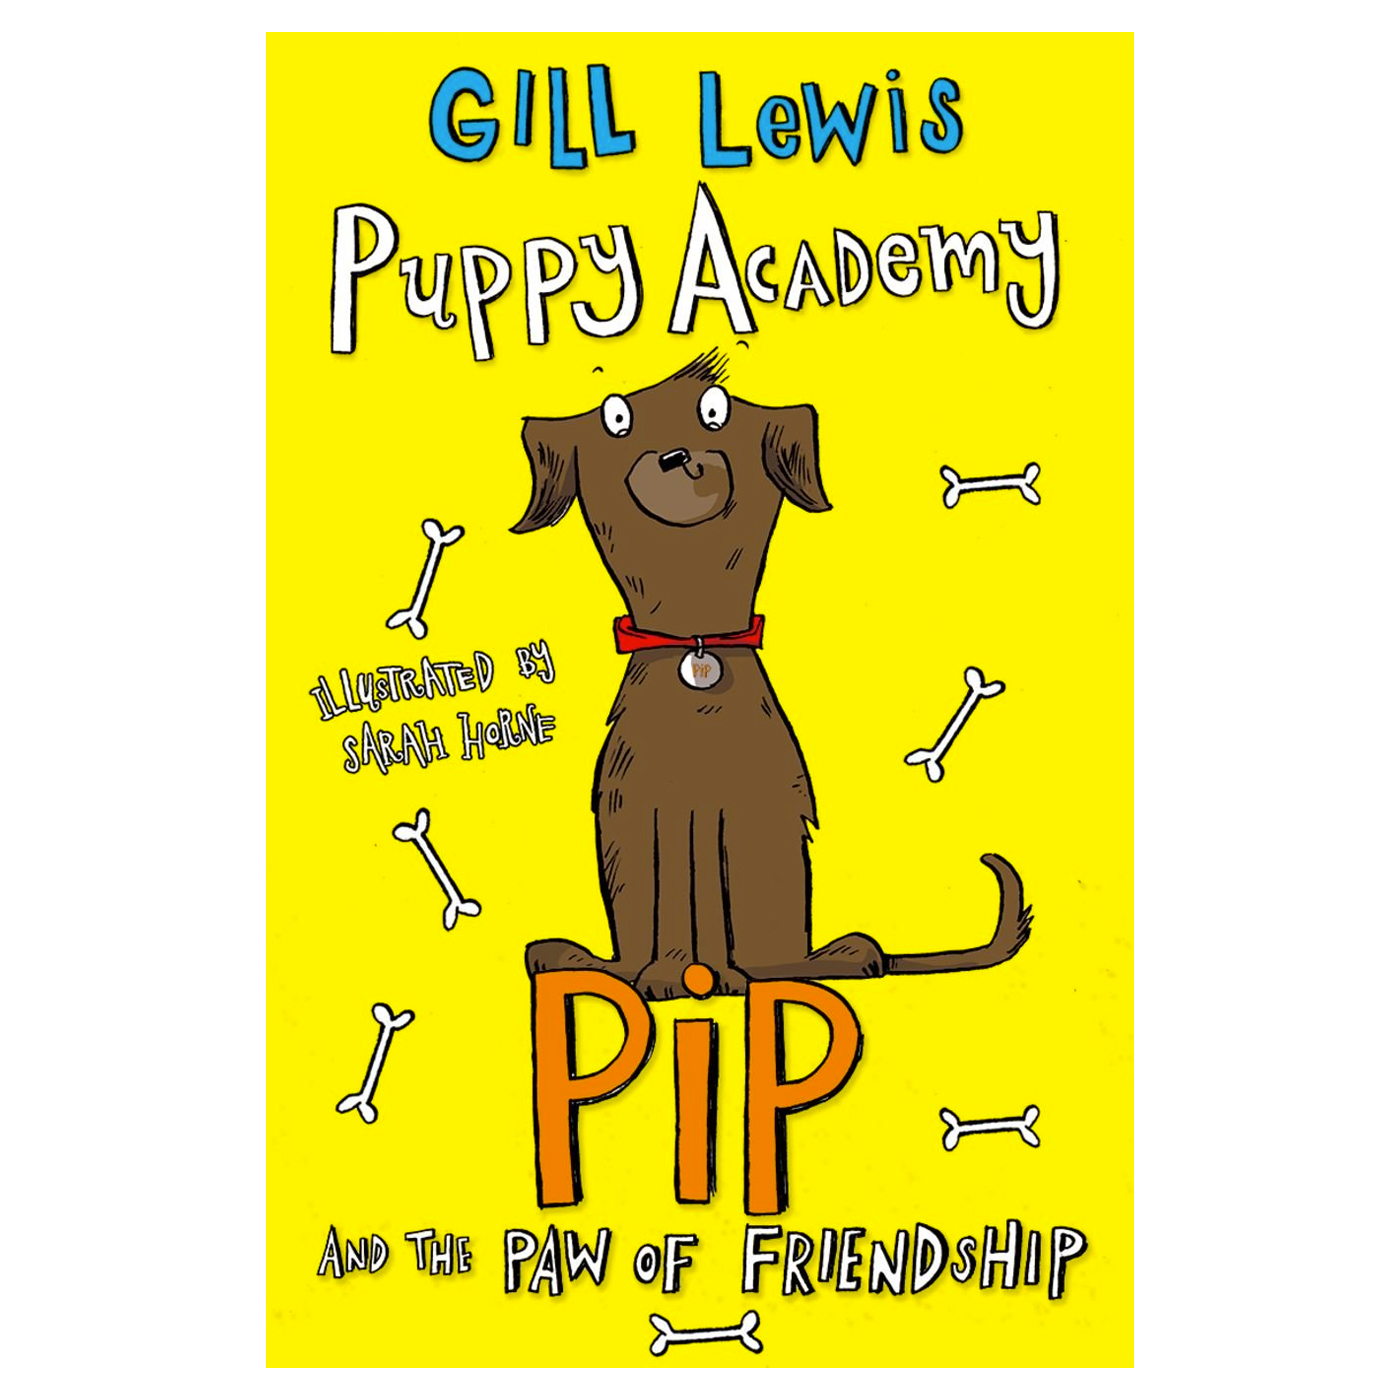  Puppy Academy: Pip And The Paw Of Friendship